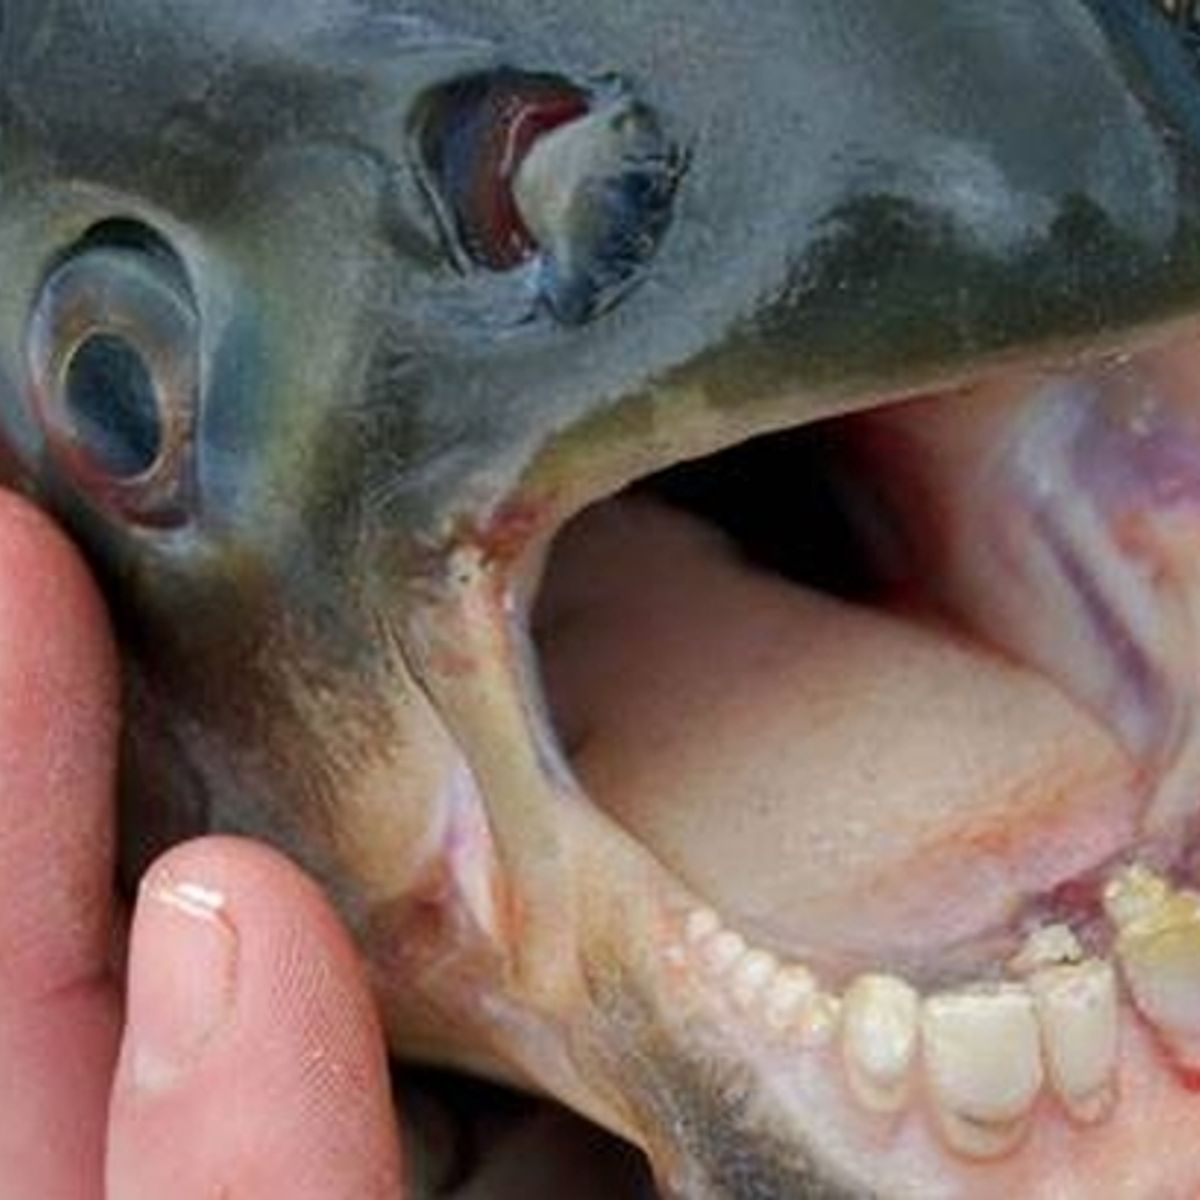 Ball Biter': How Dangerous Is the Pacu Fish, Really?